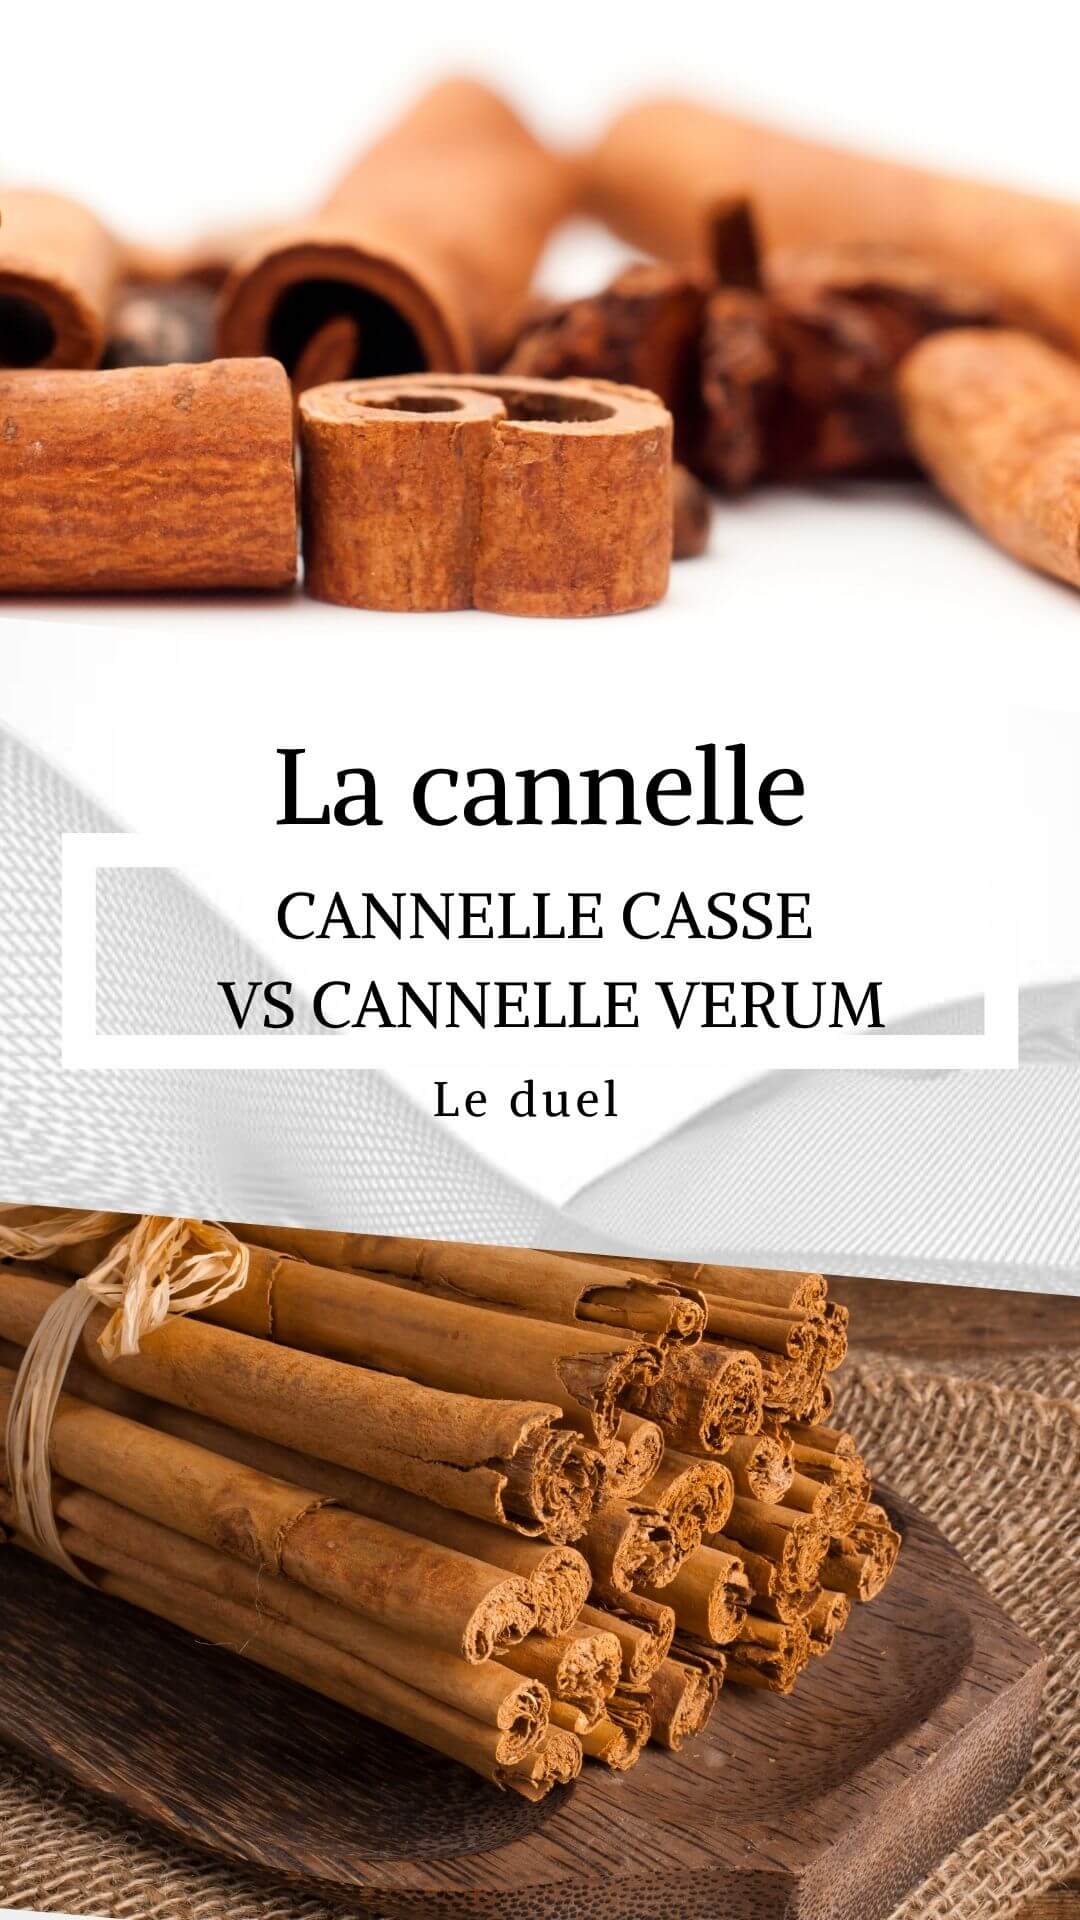 Cannelle Casse VS Cannelle Verum